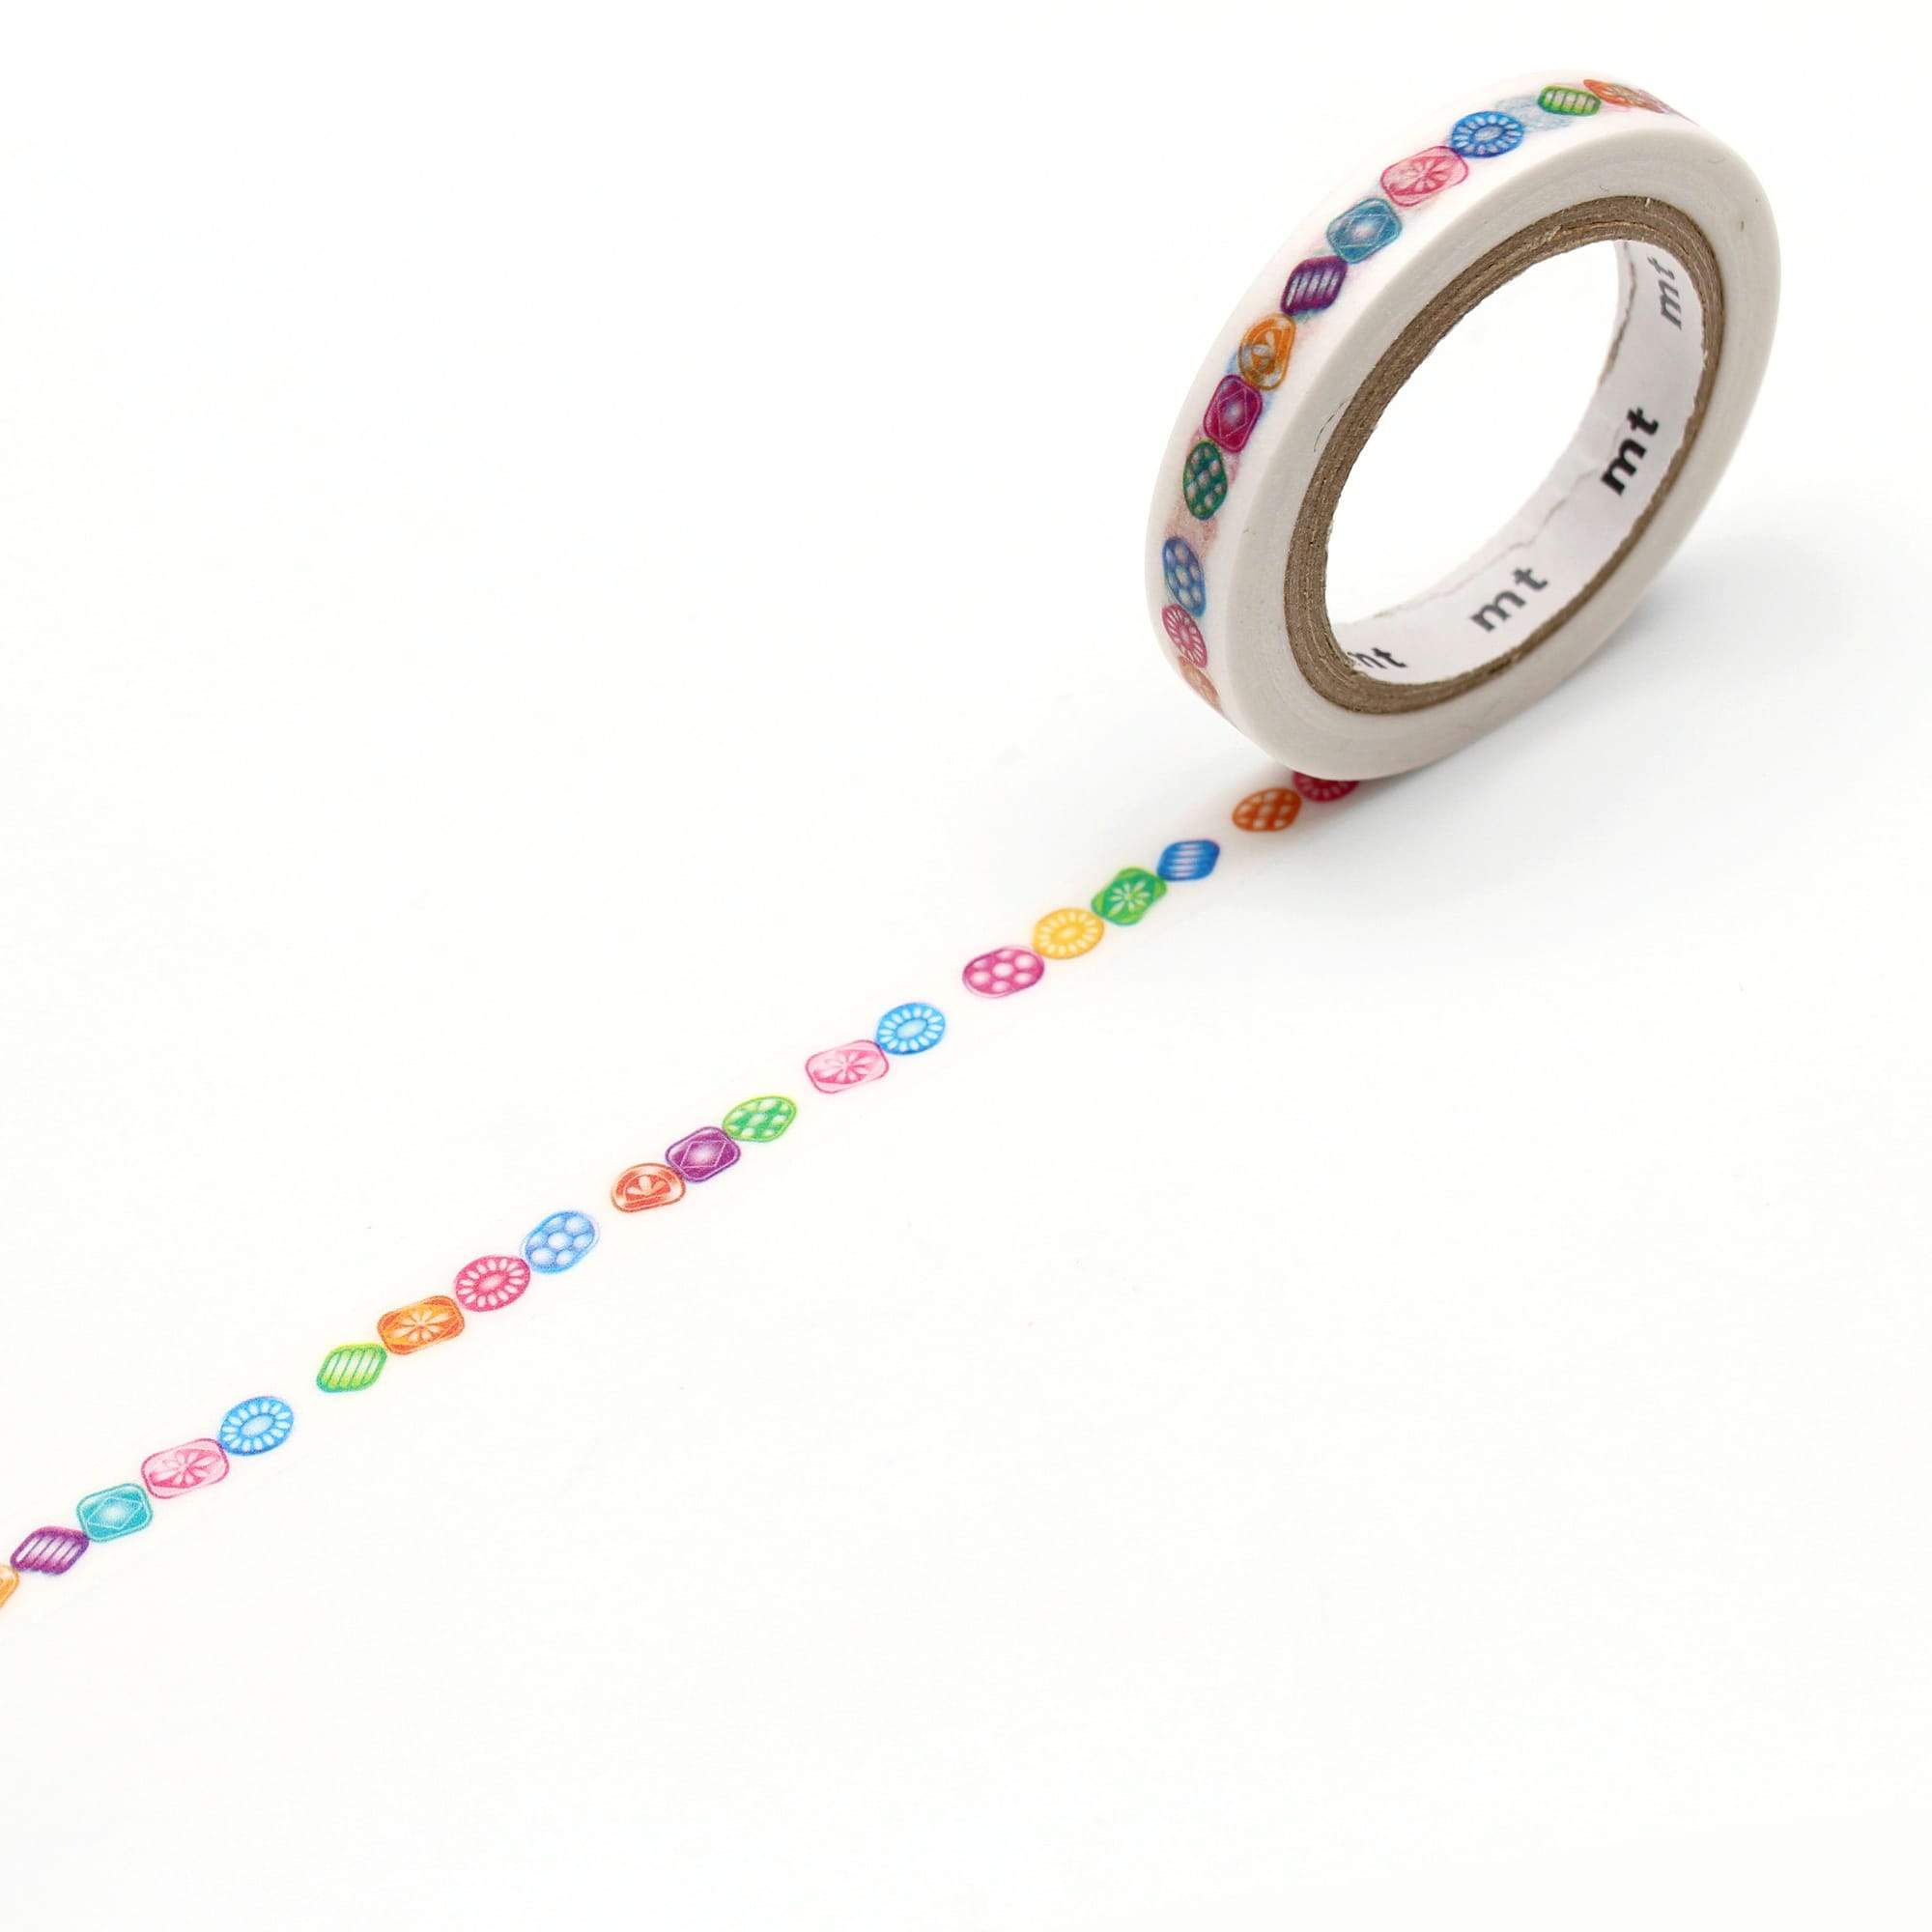 MT Washi Tape - Embroidery Line